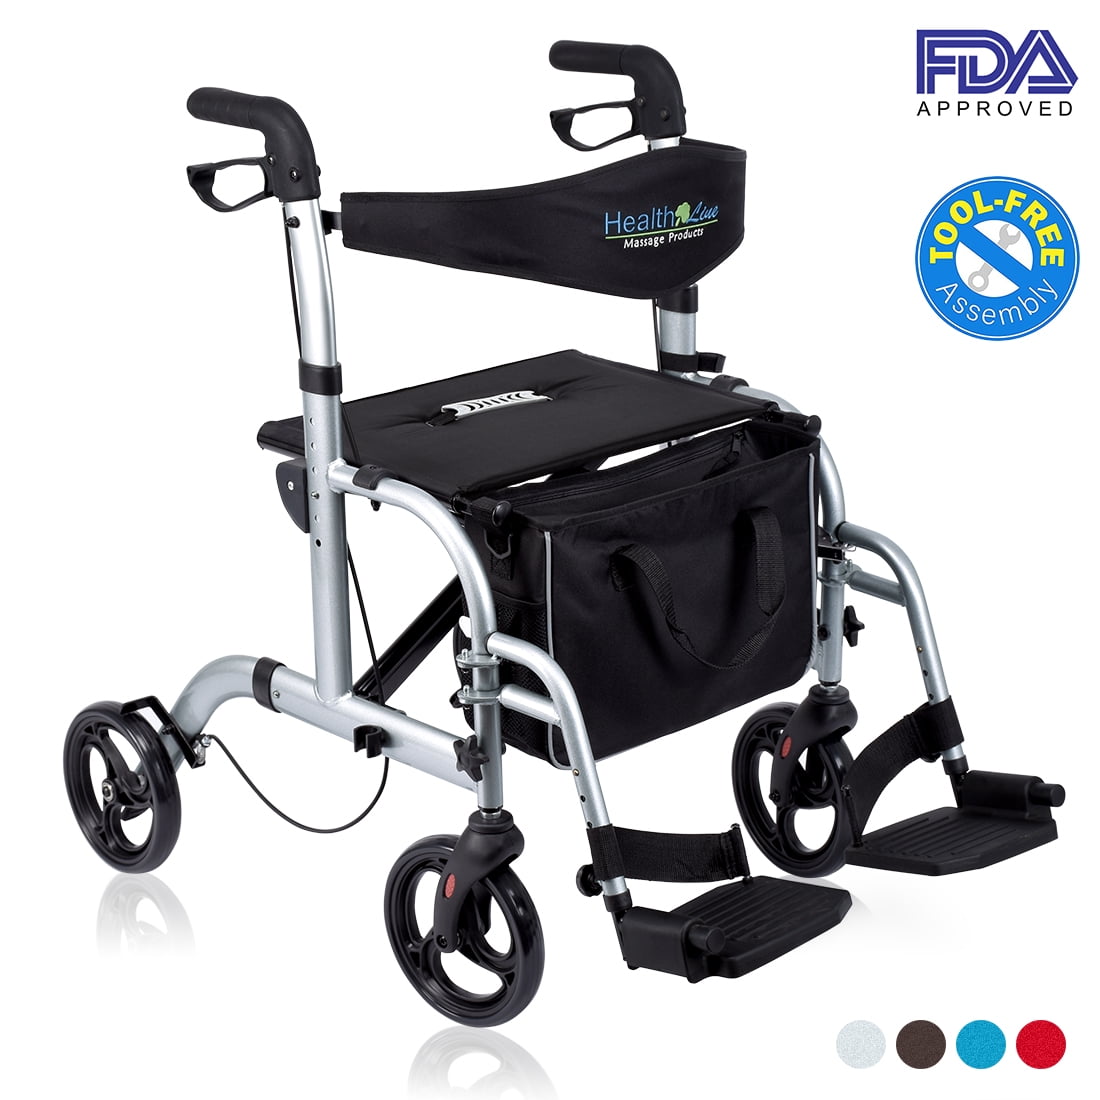 Hot Sale Health Line 2 In 1 Rollator Transport Chair W Paded Seatrest Reversible Backrest And Detachable Footrests Silver White Walmart Com Walmart Com